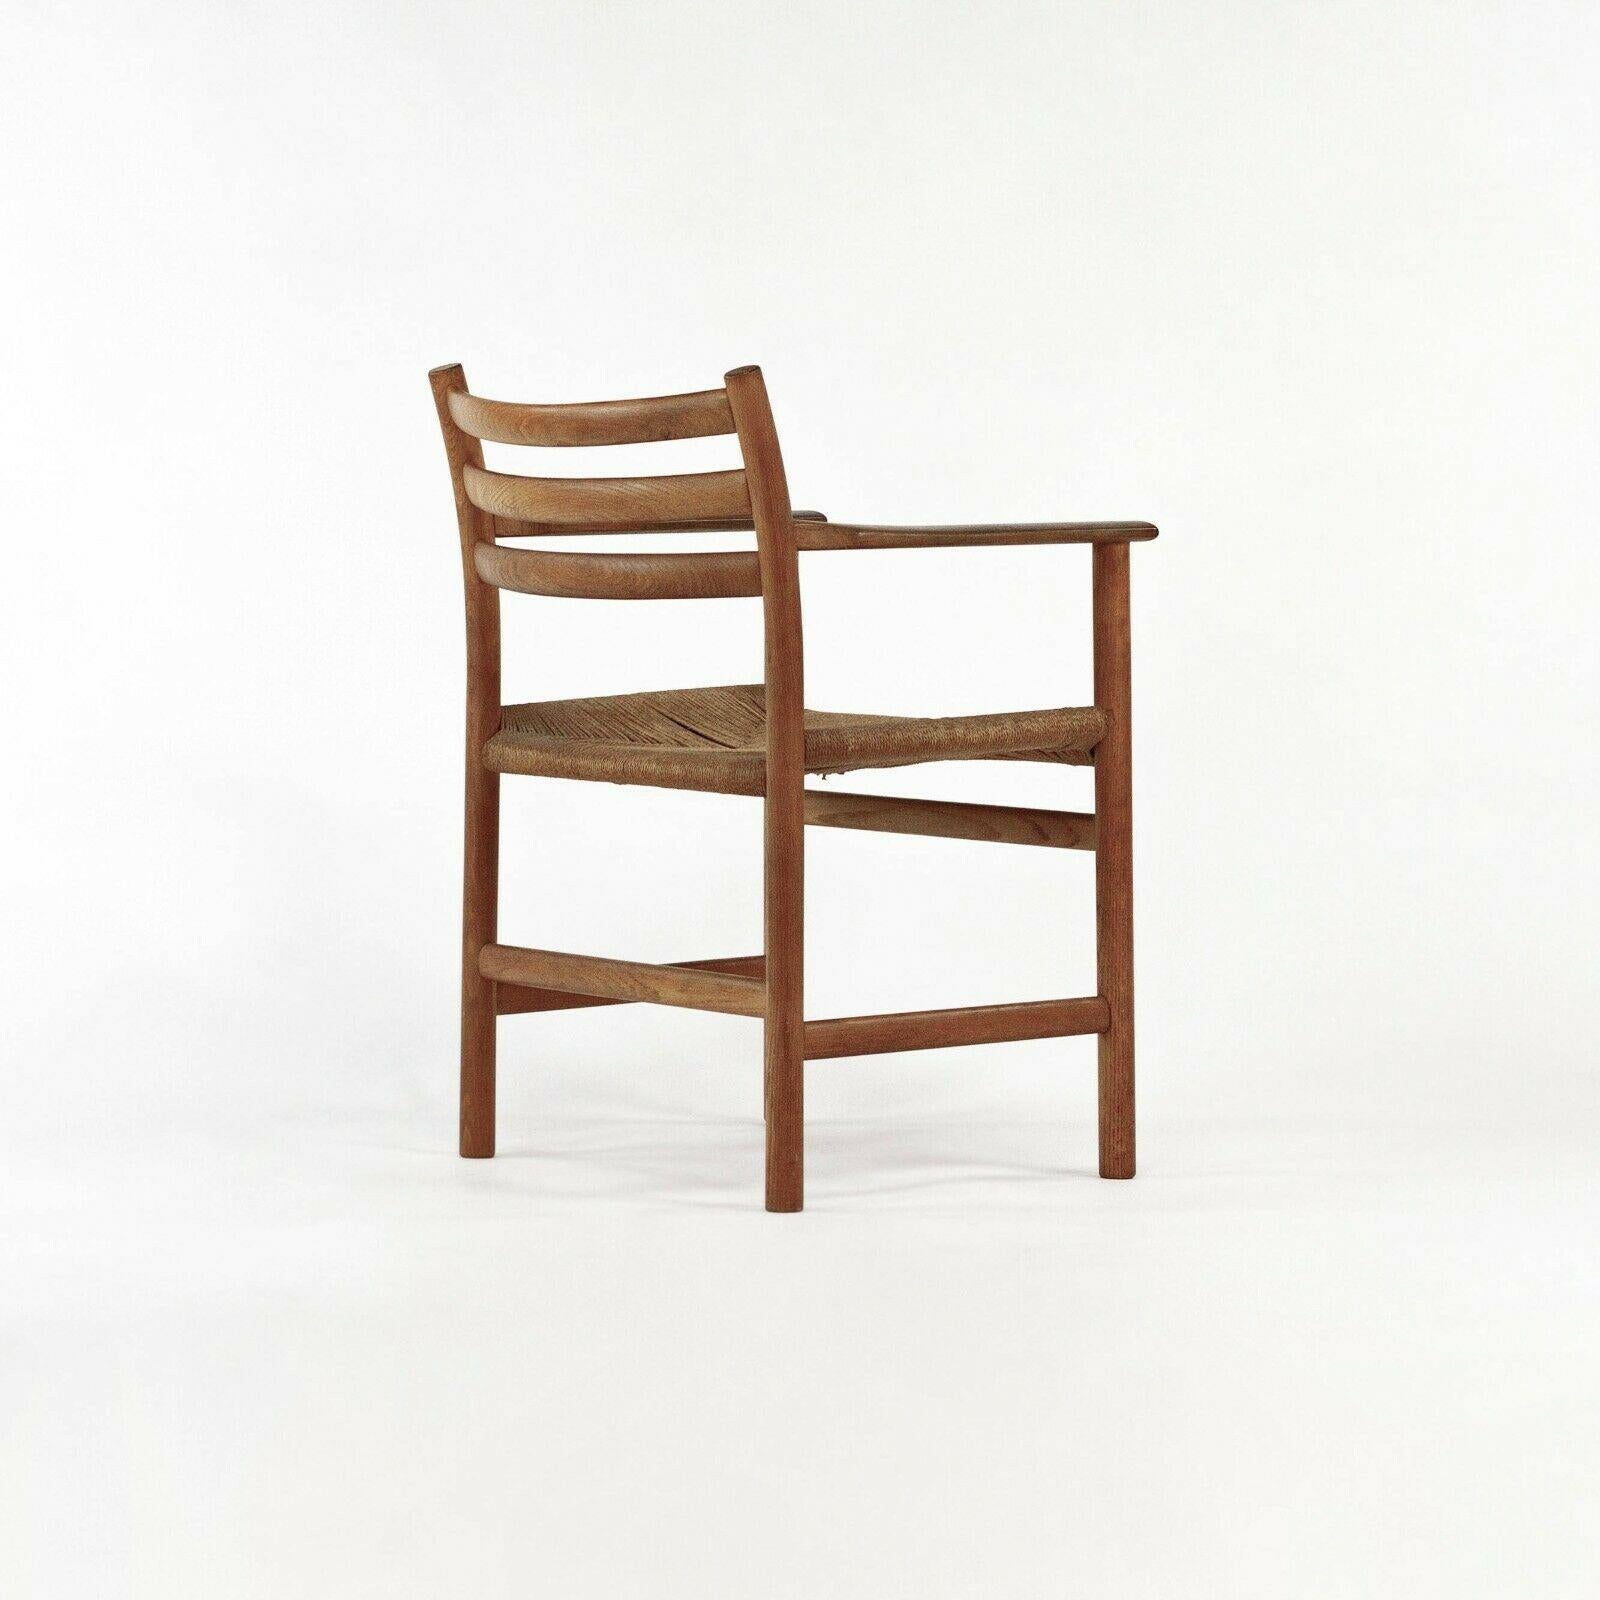 Danish 1960s Model 351 Dining Arm Chair by Poul Volther for Soro Stolefabrik of Denmark For Sale